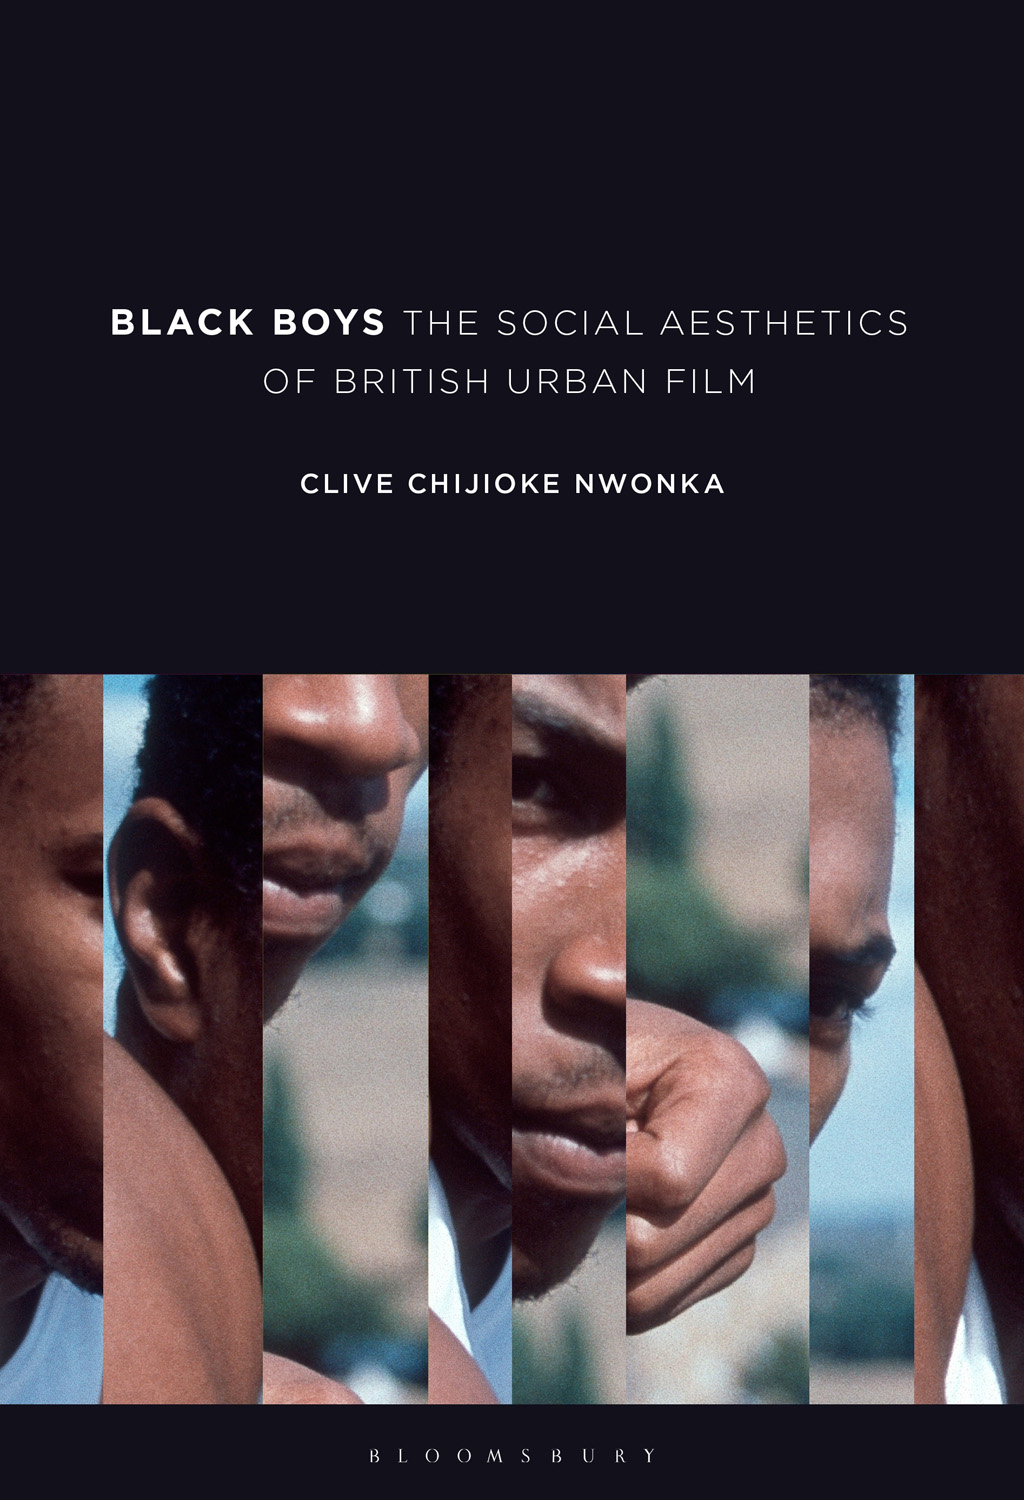 The cover features a collage of close-up images of young Black men's faces, divided by vertical stripes, set against a dark background with the title in bold white text.